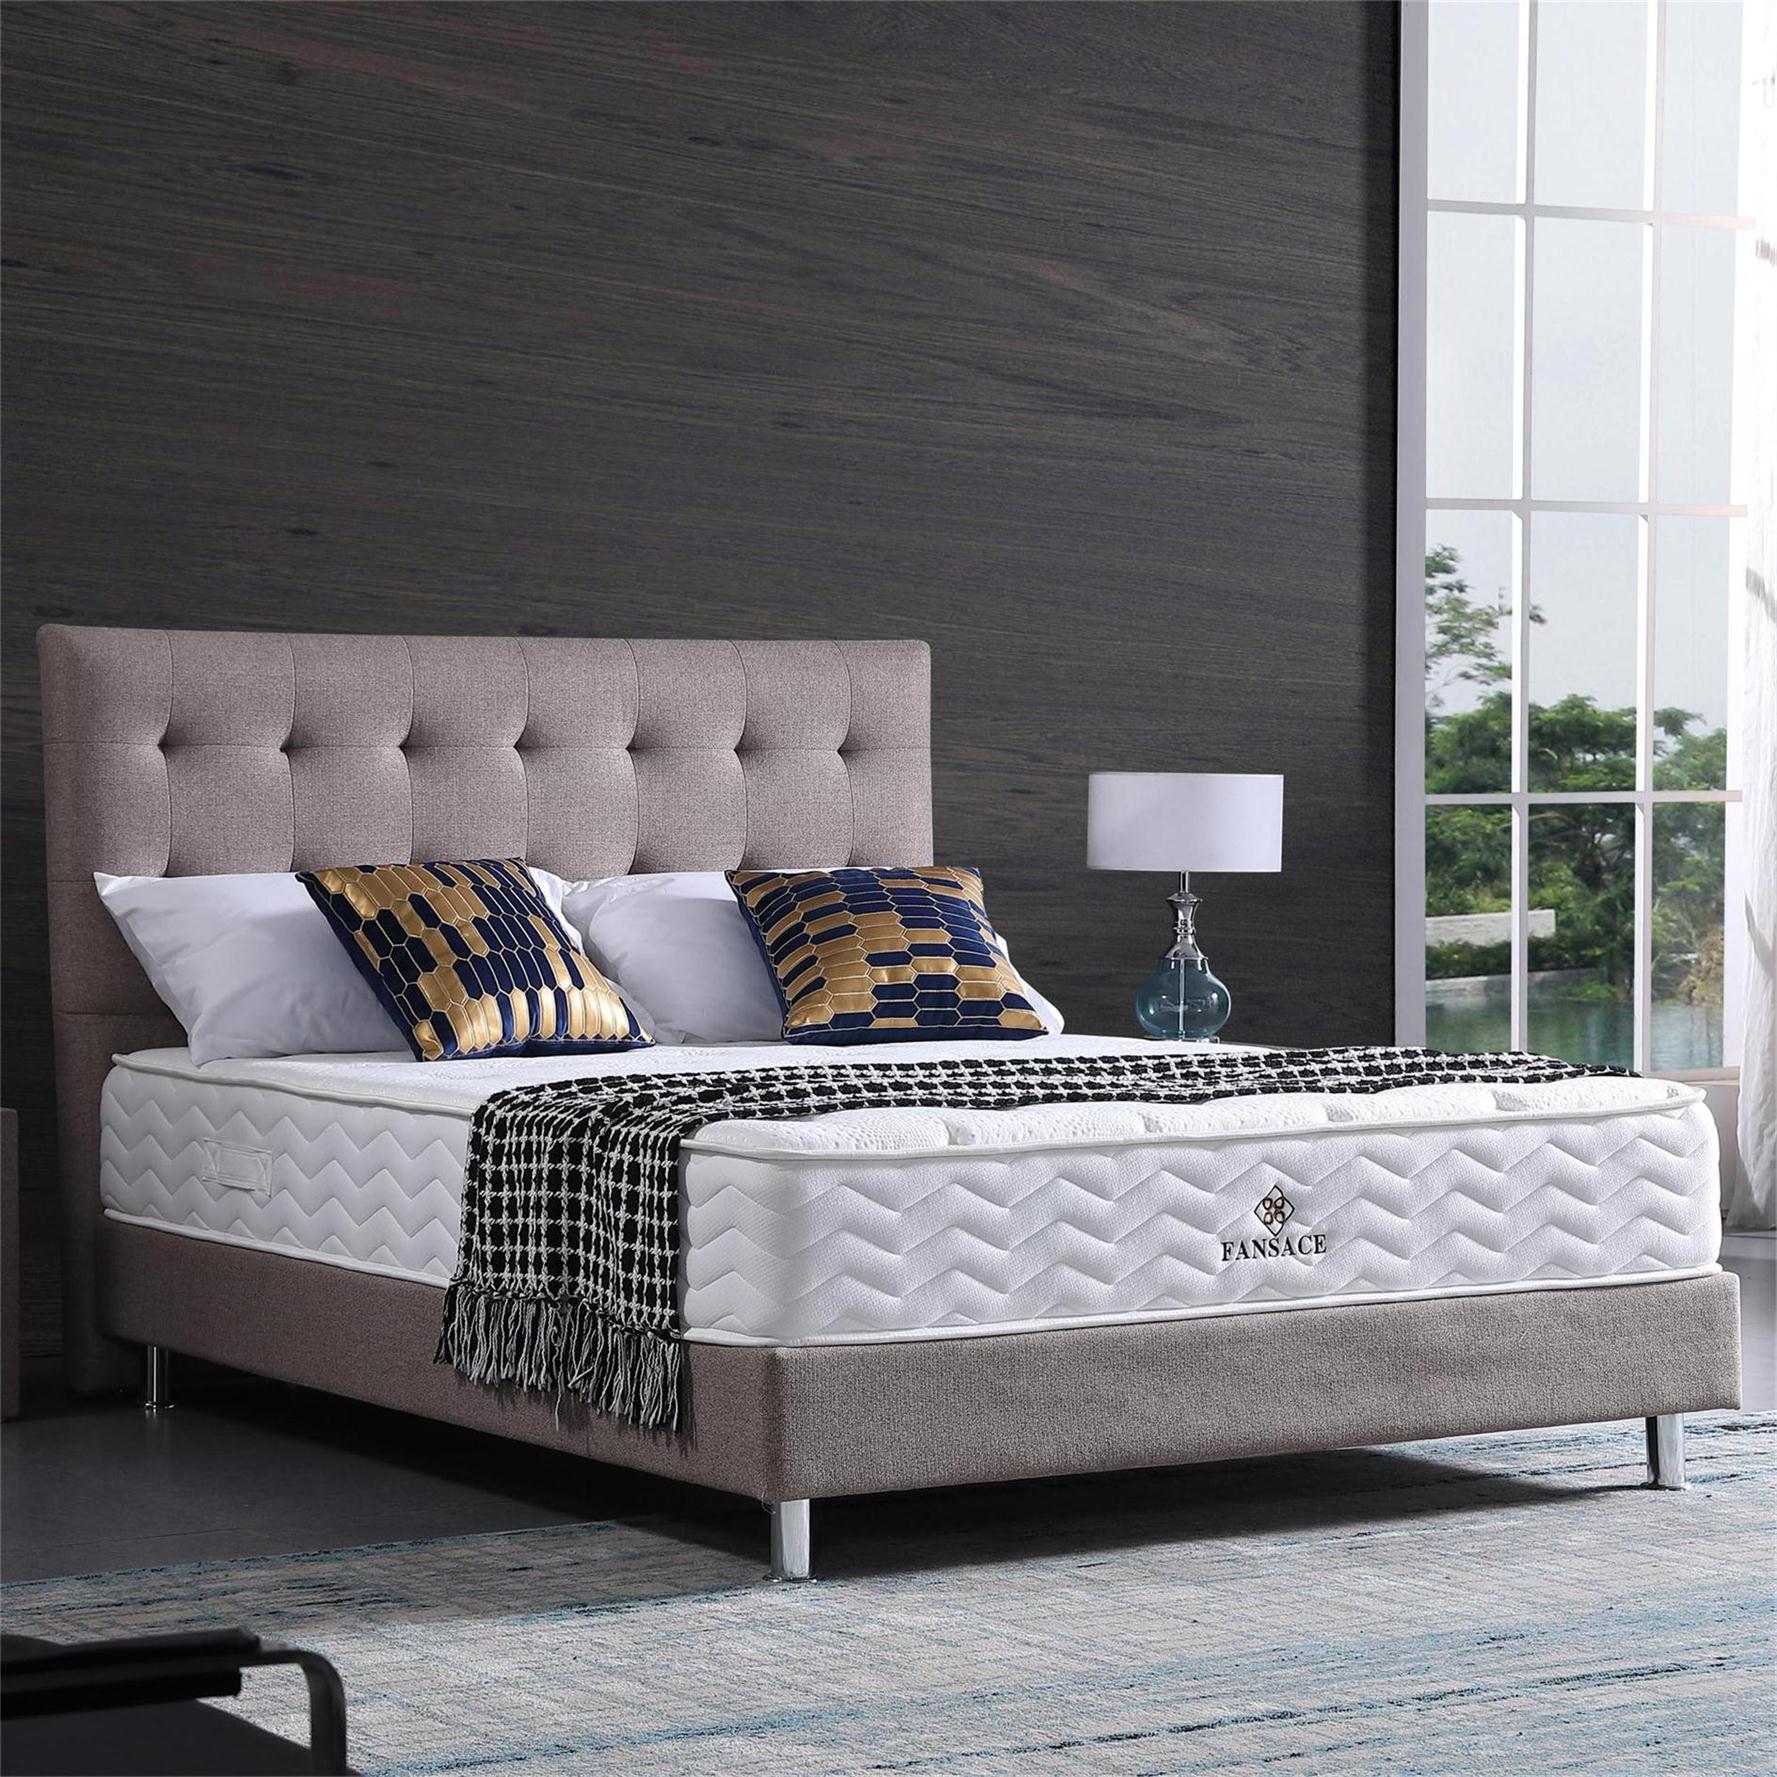 JLH-Fansace 21BA-02 | Hotel Mattress with Tight Top Design Compressed in a Pallet 24cm Height-1